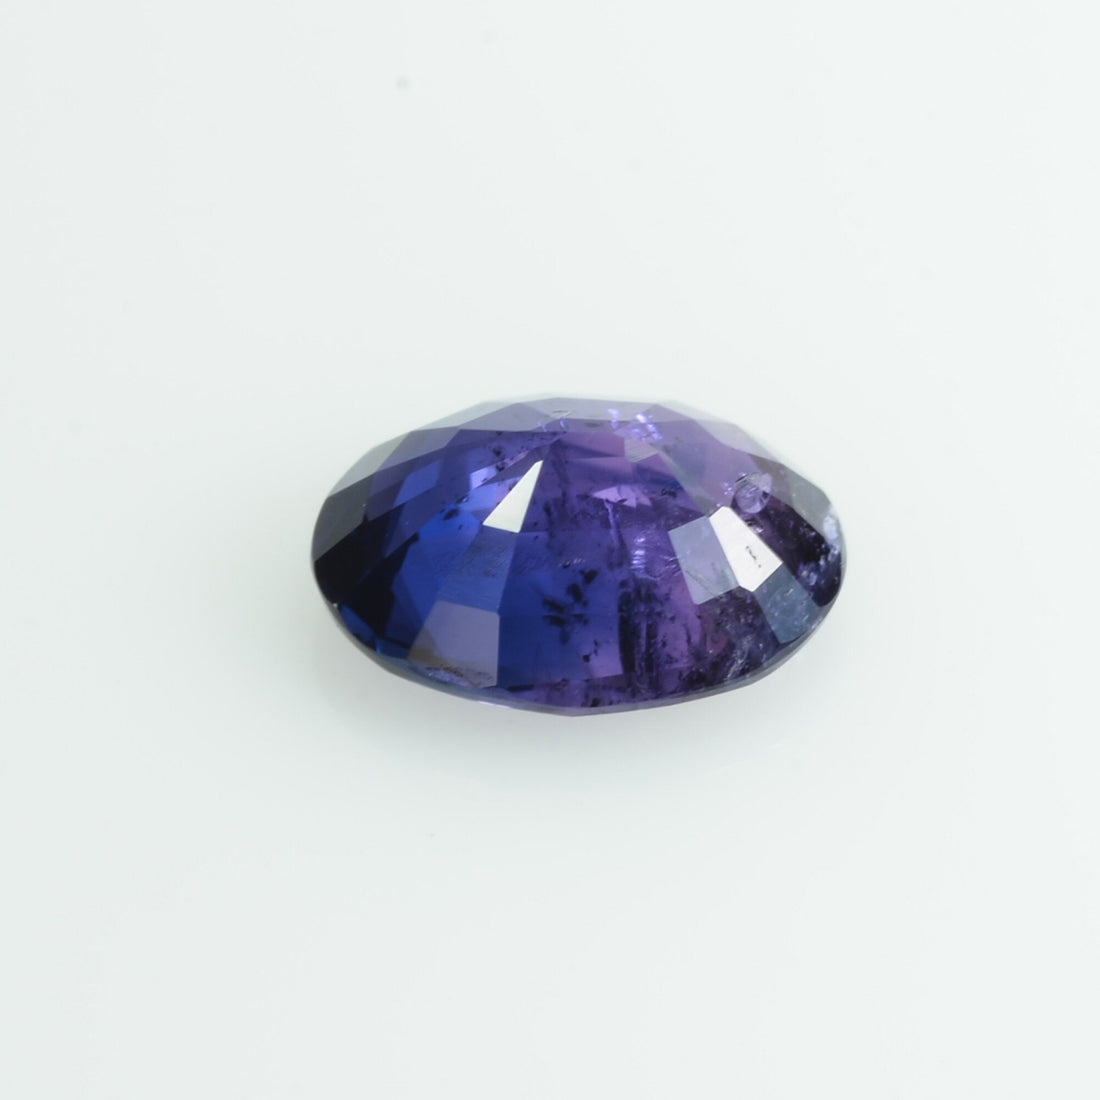 1.35 cts Natural Fancy Bi-Color Sapphire Loose Gemstone oval Cut